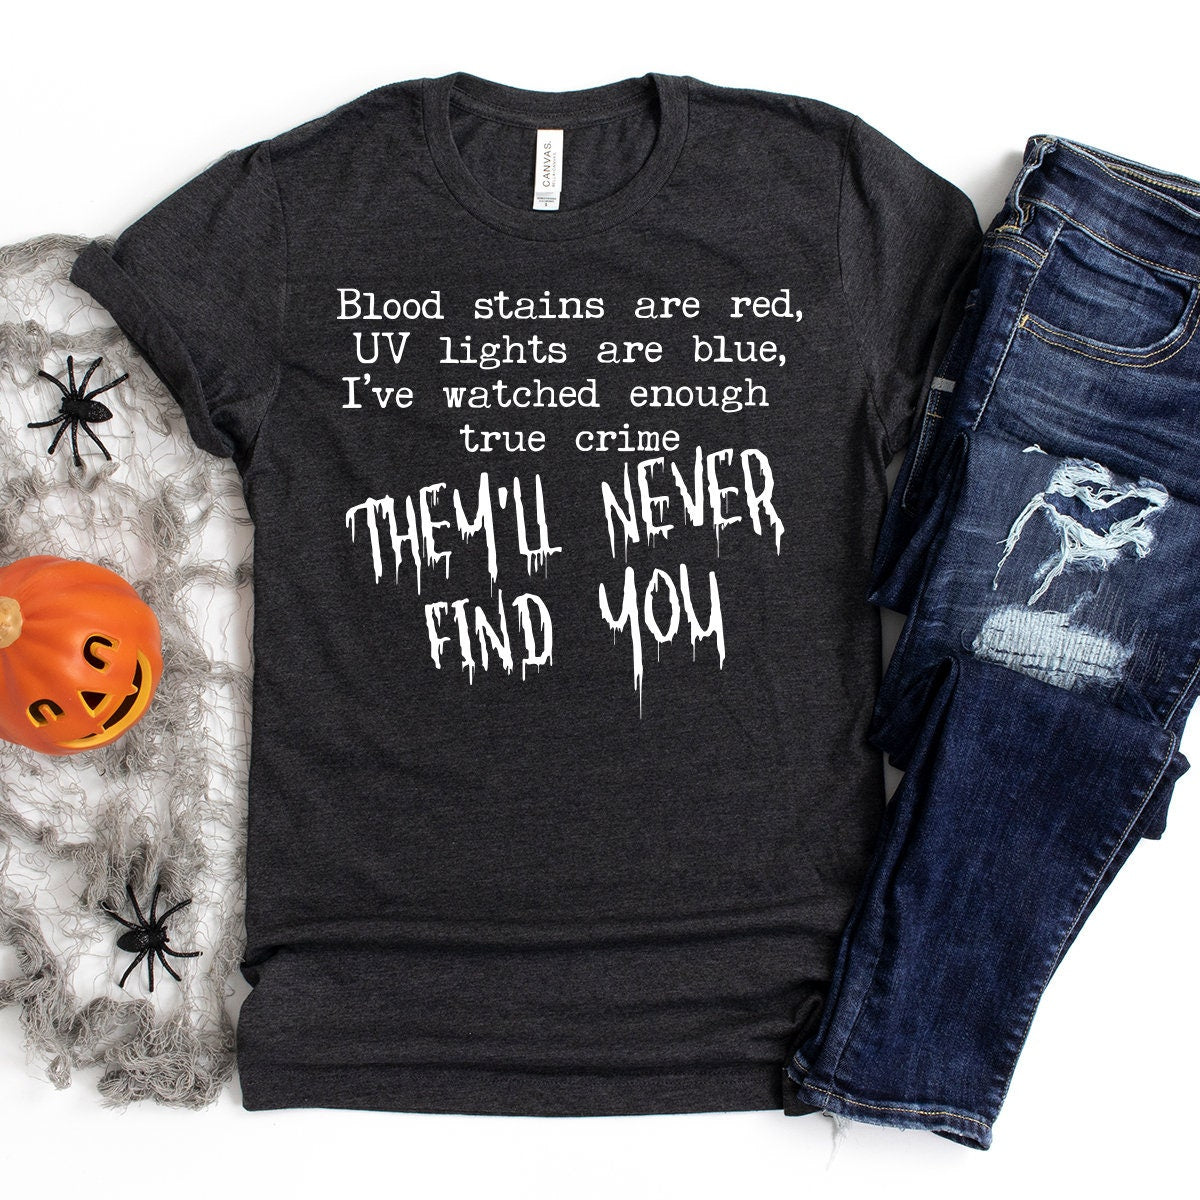 Serial Killer Shirt, They'll Never Find You Shirt, Halloween shirt, Crime Shows Tshirt, Funny Horror Tee - Fastdeliverytees.com